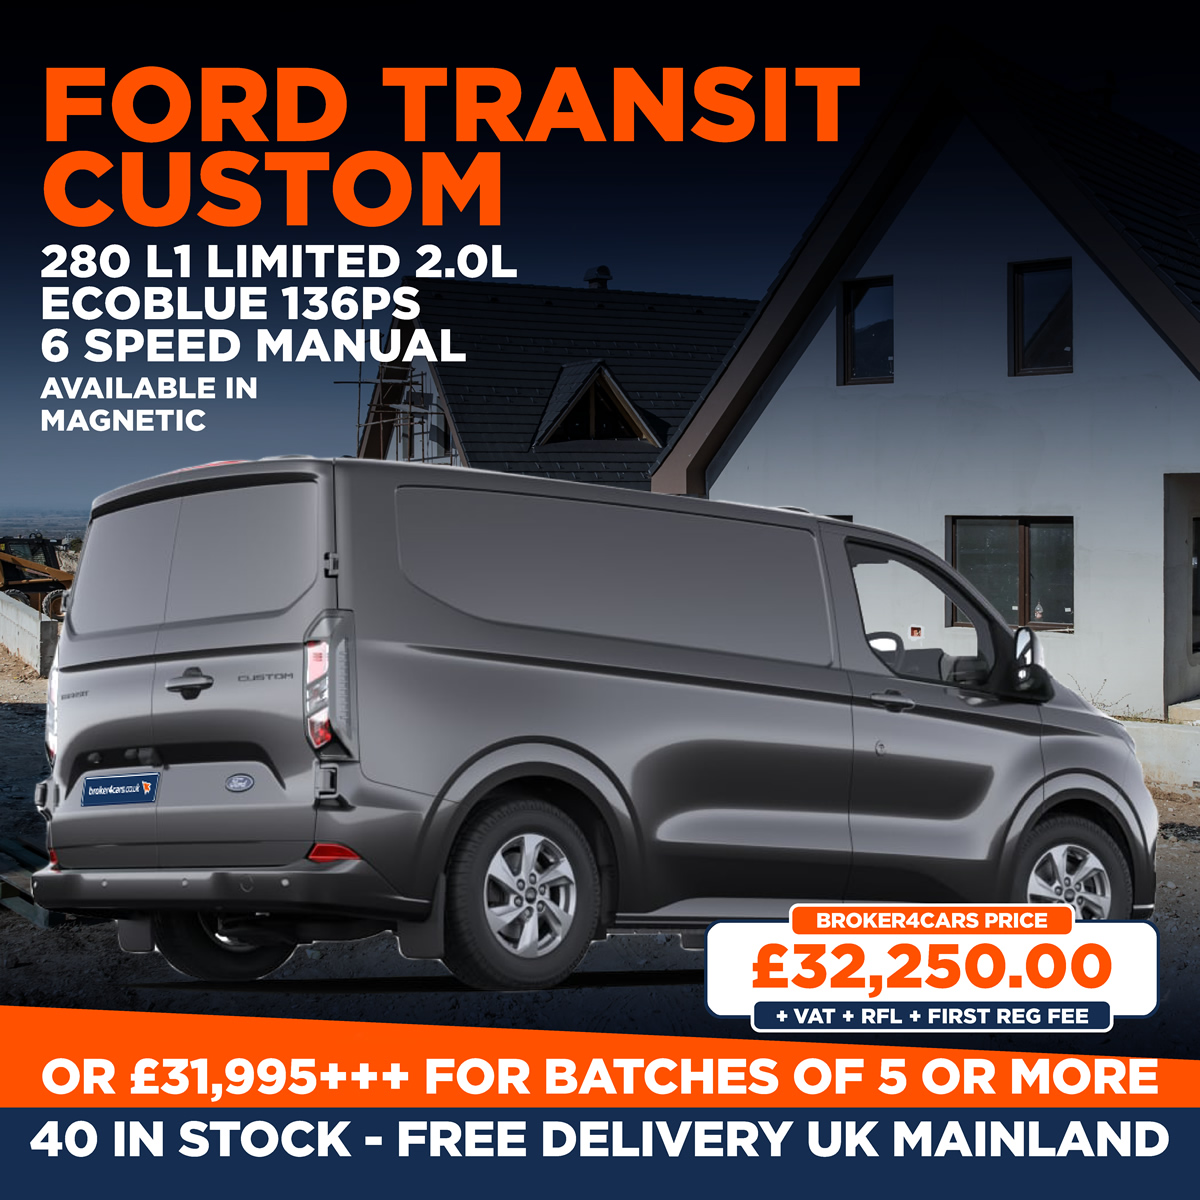 ALL IN STOCK WITH FREE DELIVERY. 40 in Stock. All above prices are + VAT + RFL + 1st Reg Fee. Broker4Cars Price £32,250 OTR